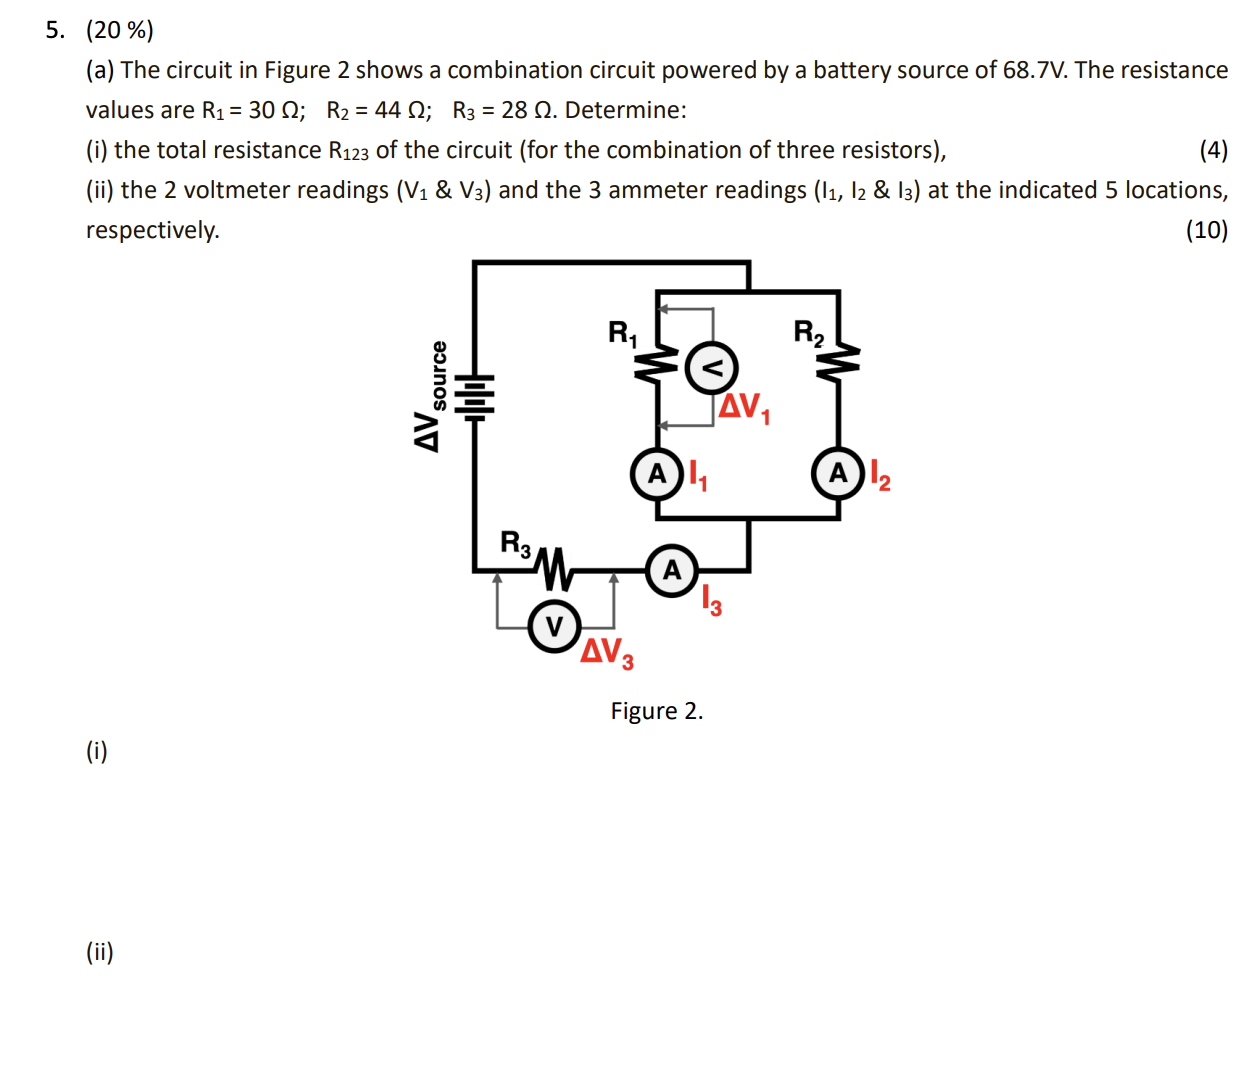 5. (20%) (a) The circuit in Figure 2 shows a combination circuit powered by a battery source of 68.7V. The